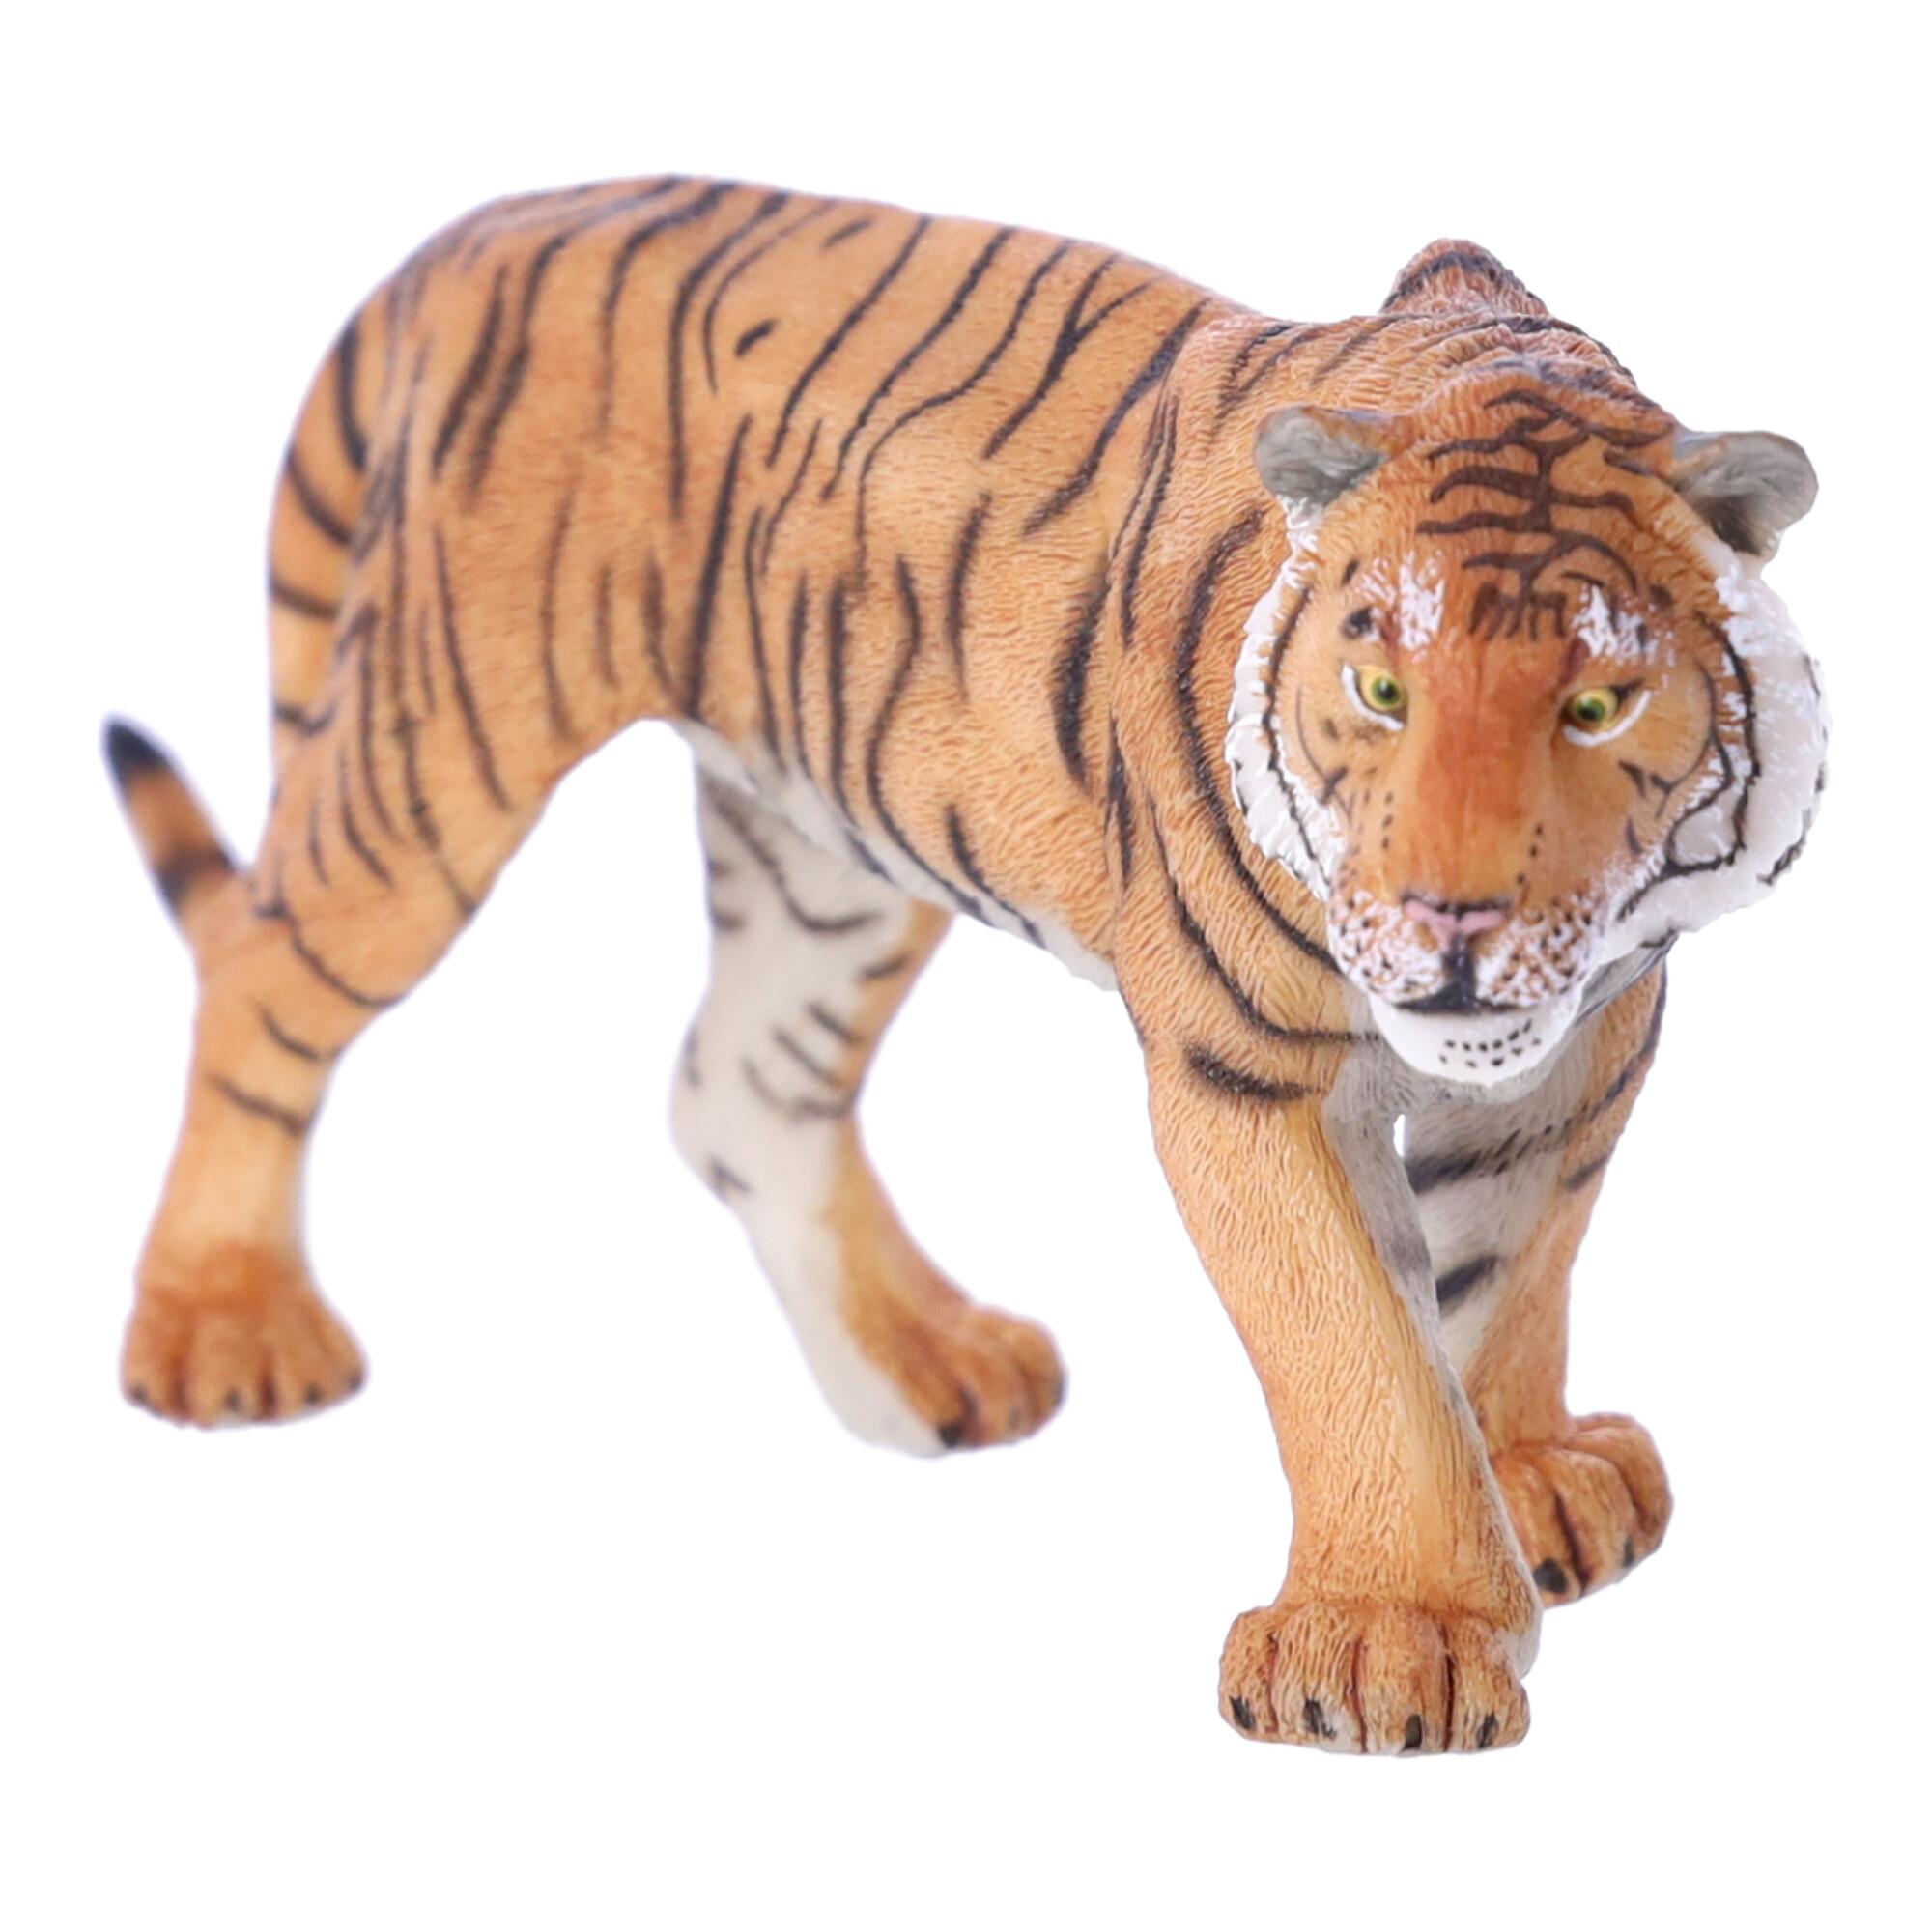 Collectible figurine Tiger, Papo